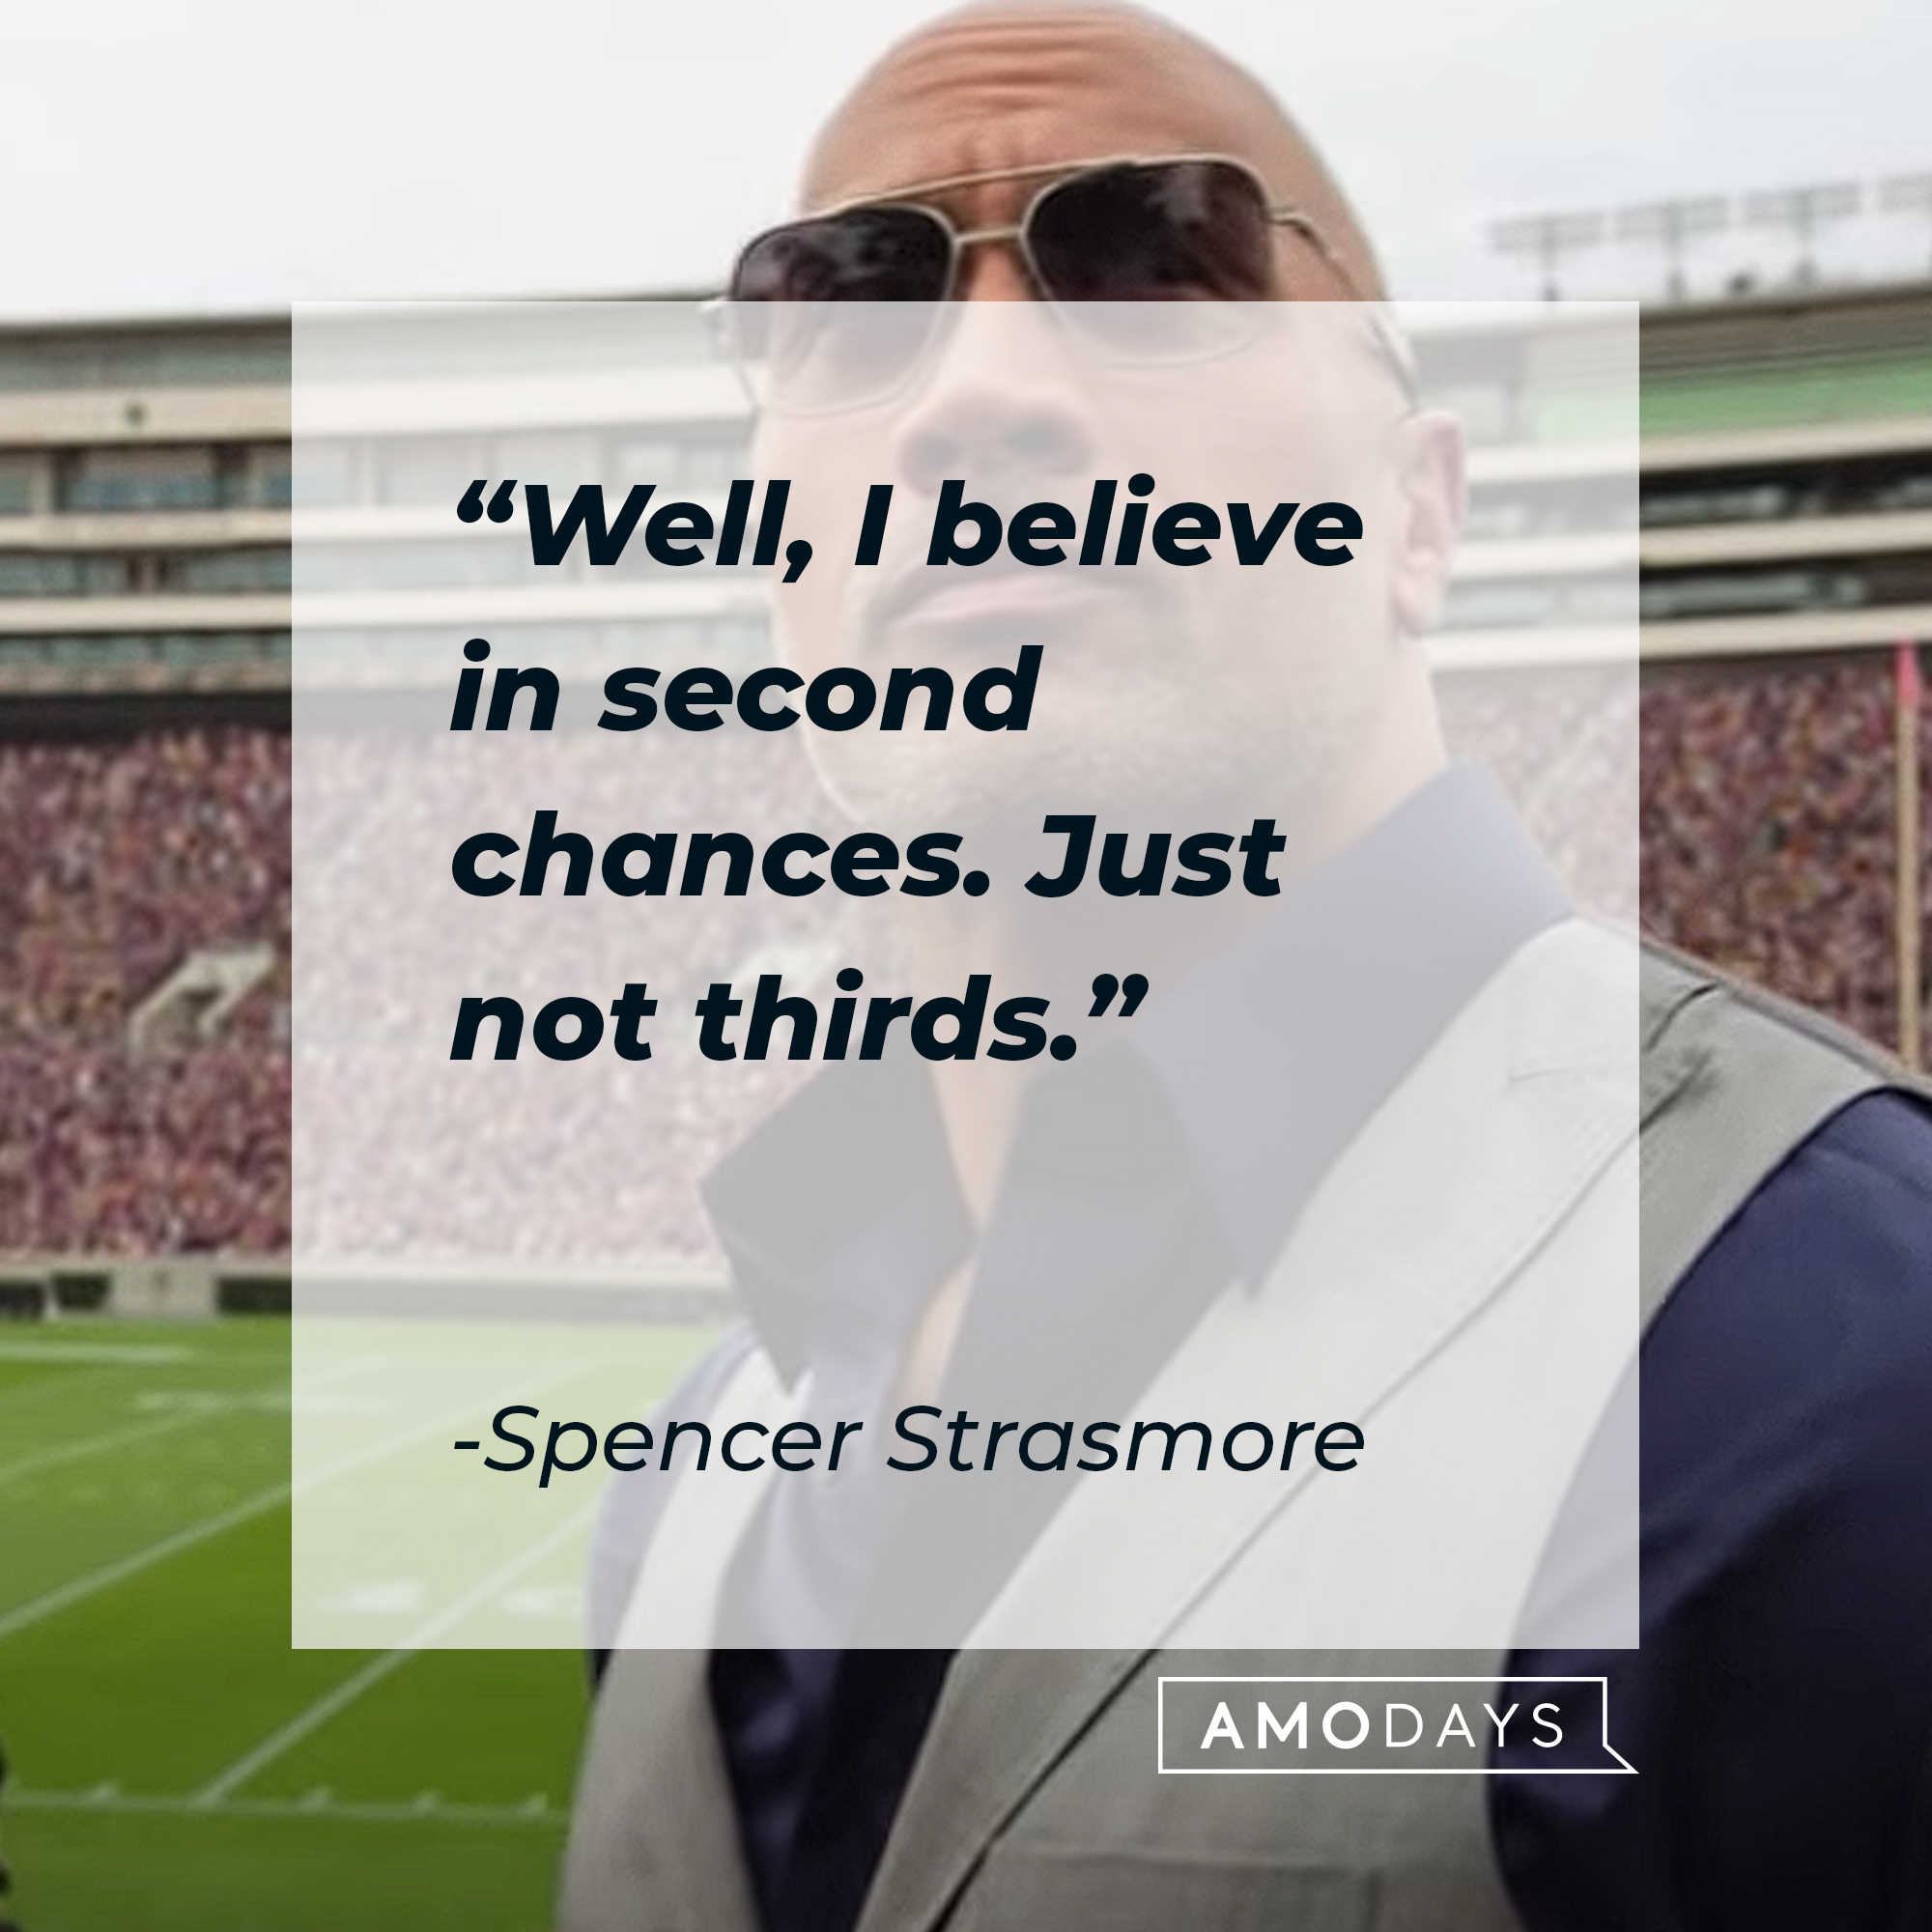 Dwayne “The Rock” Johnson as Spencer Strasmore with his quote:“Well, I believe in second chances. Just not thirds.”  | Source: youtube.com/HBO